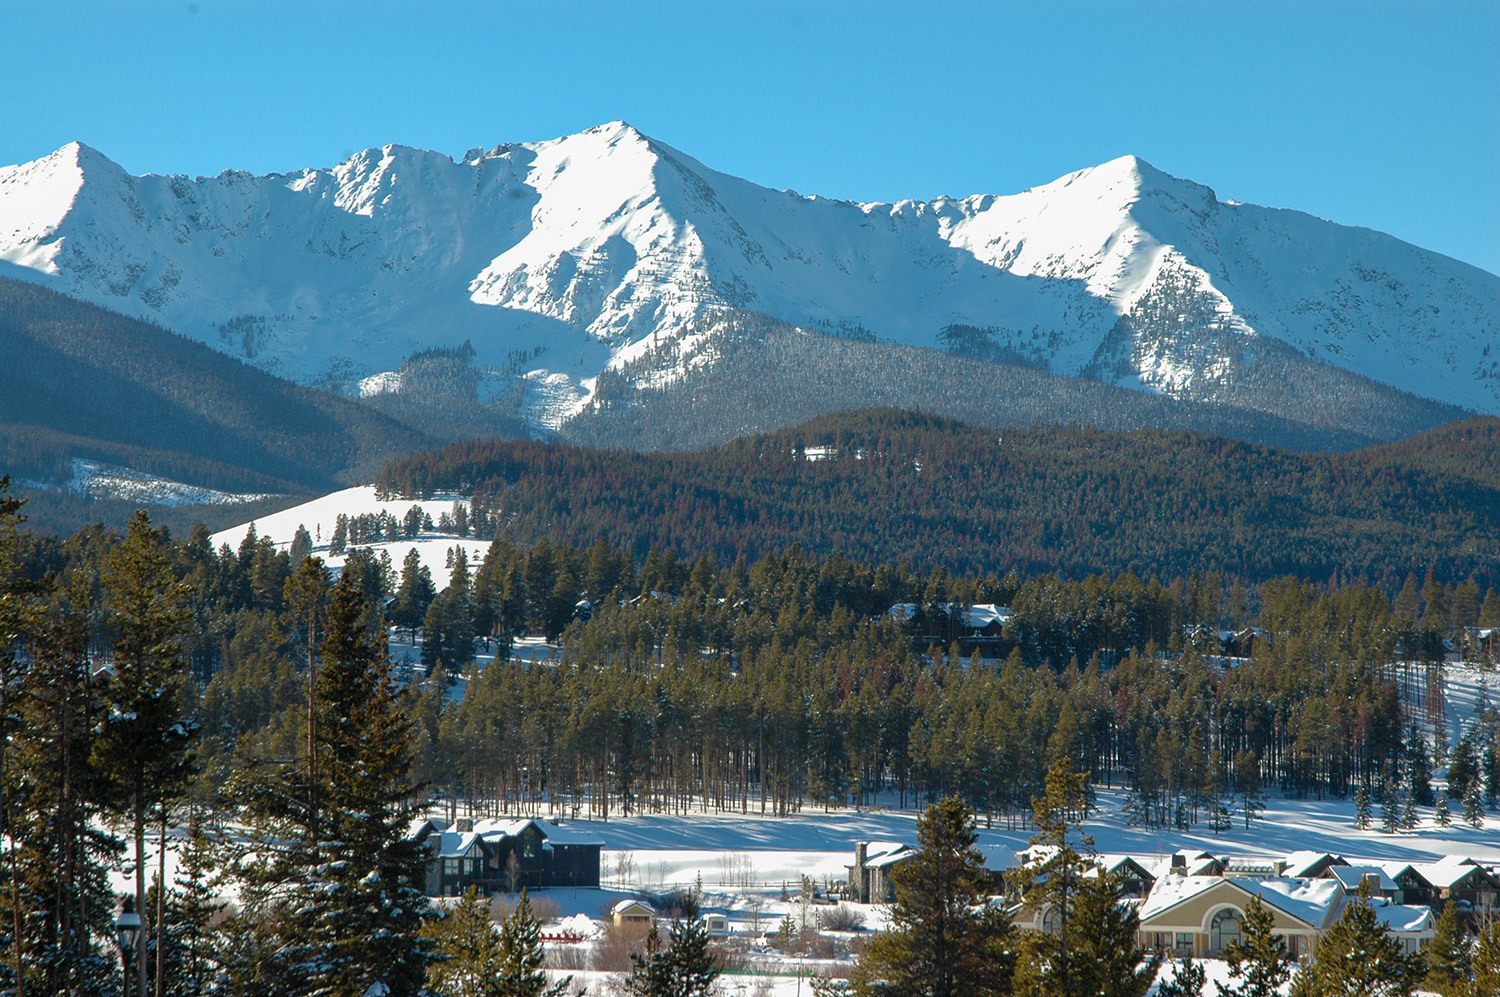 View to the Tenmile Range from Highland Park